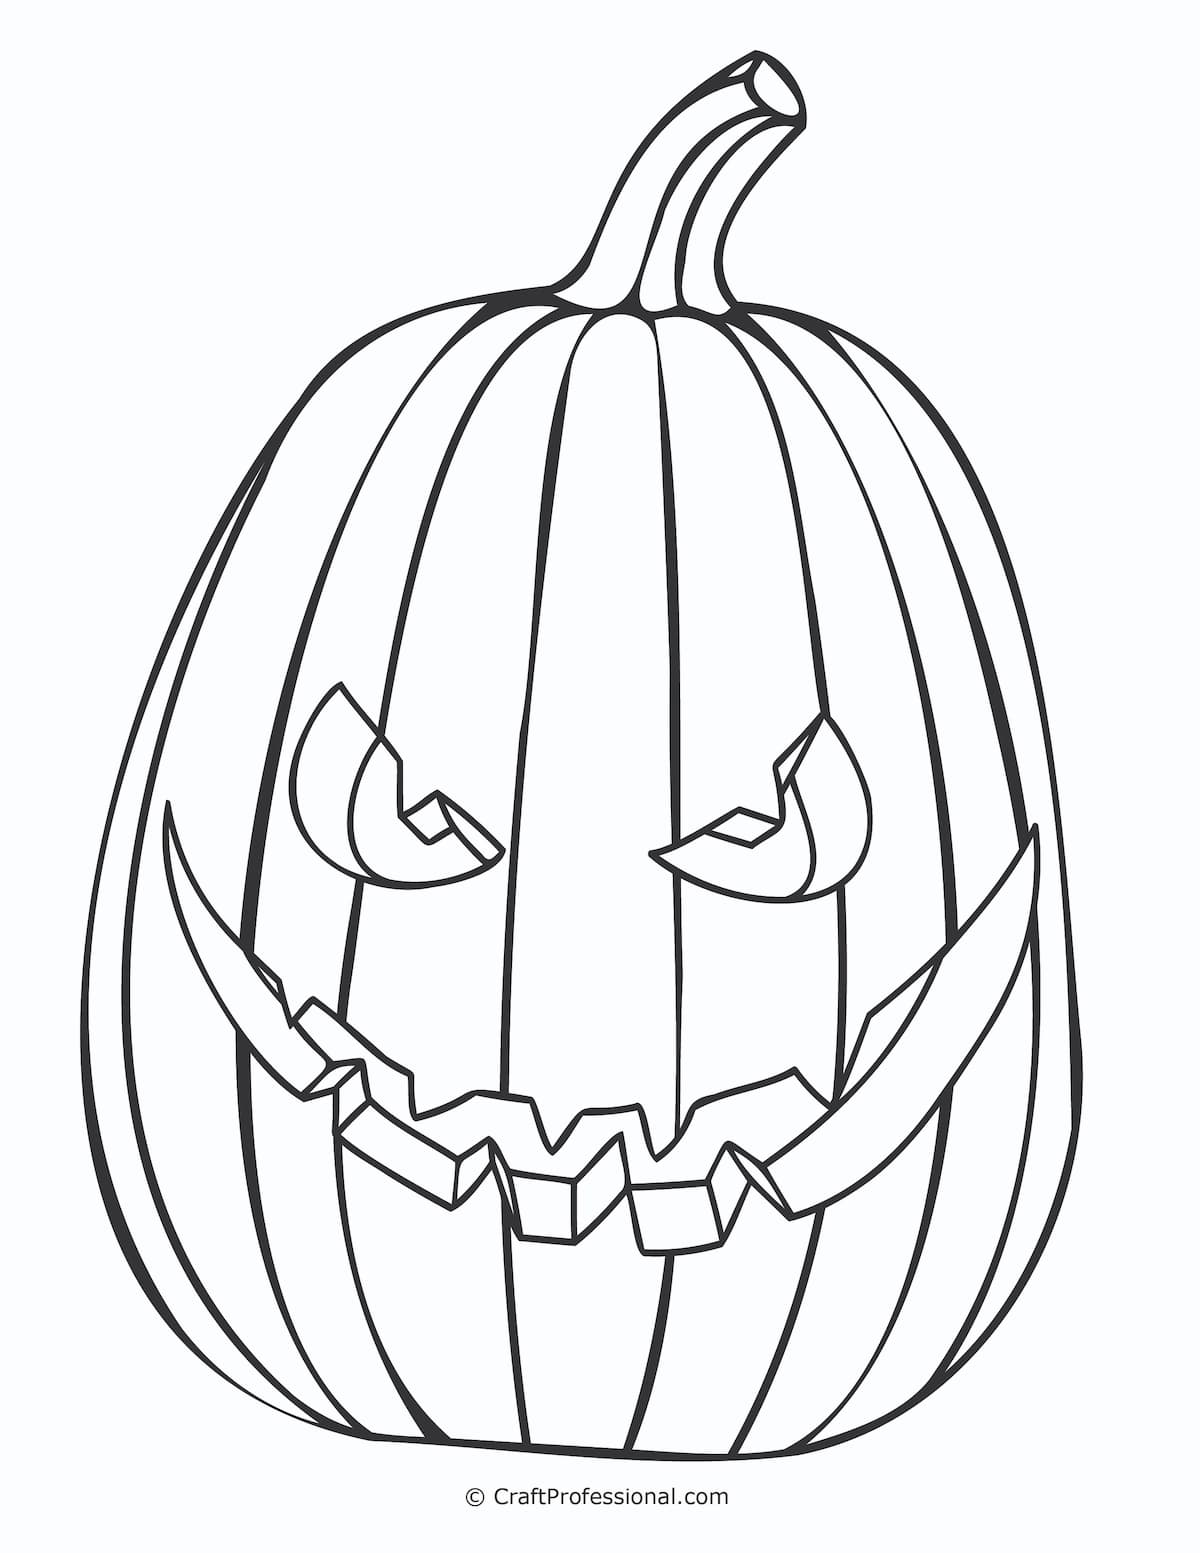 pumpkin coloring pages for halloween